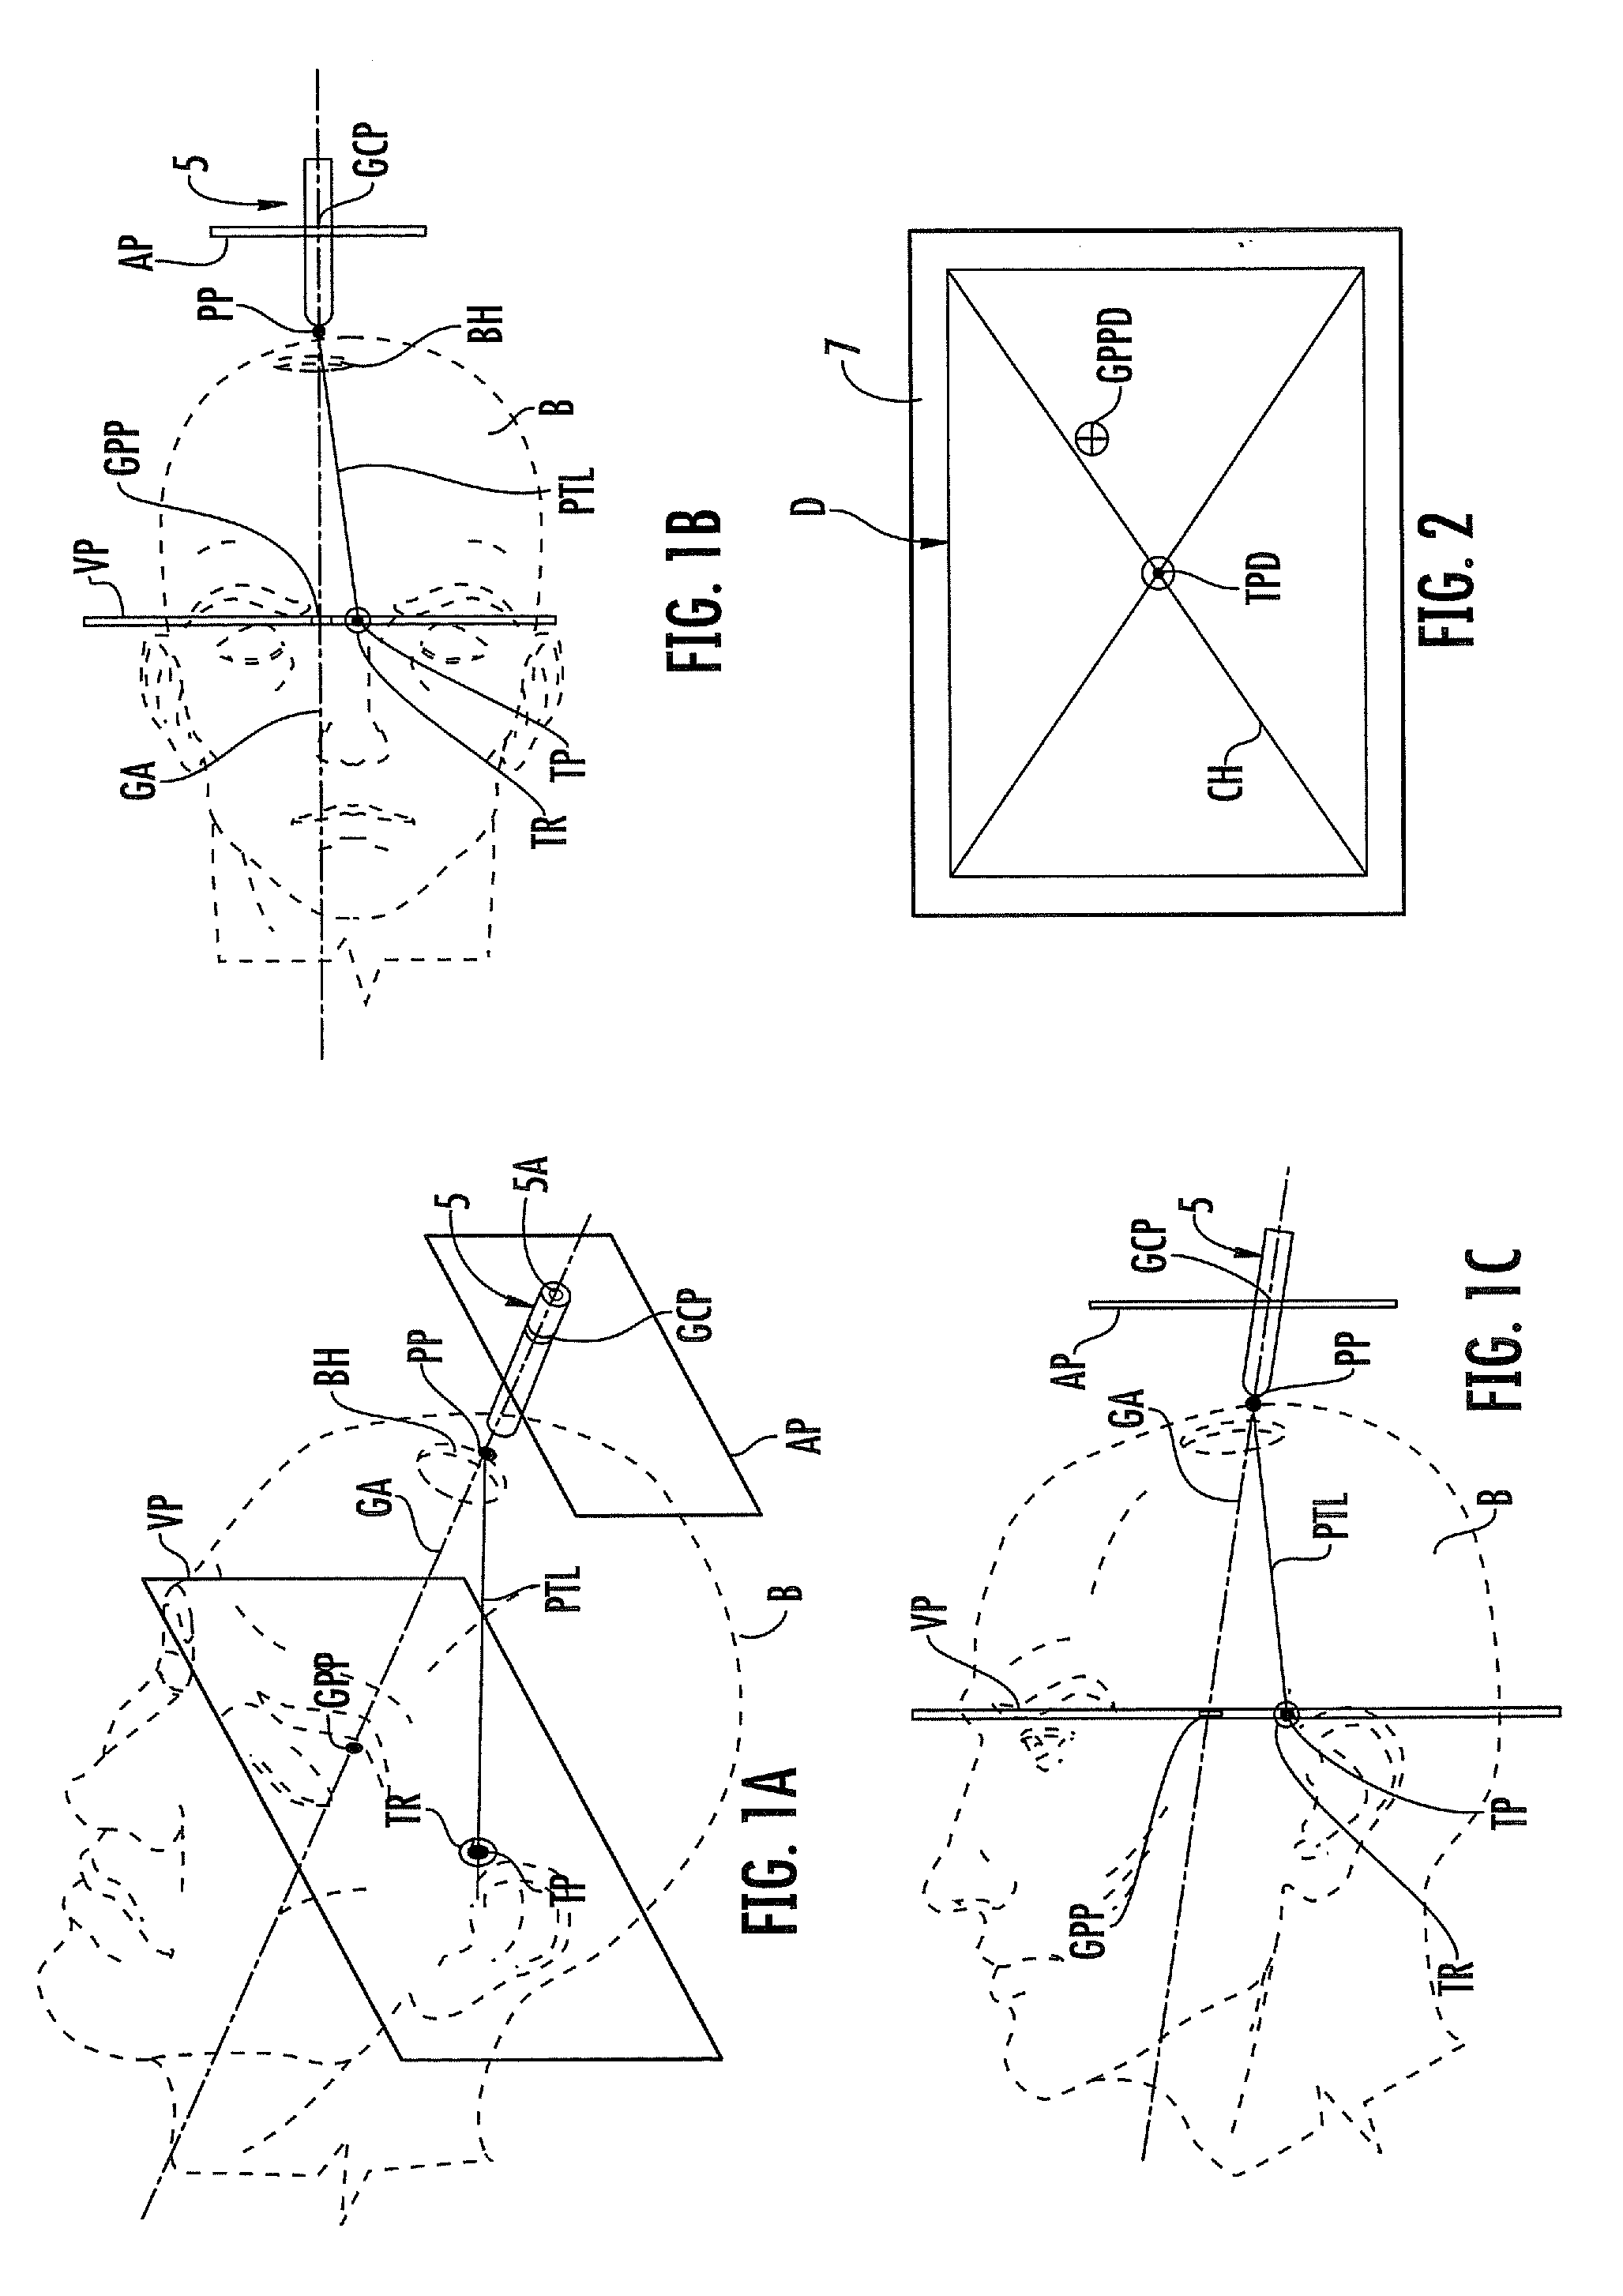 Methods, systems and computer program products for positioning a guidance apparatus relative to a patient